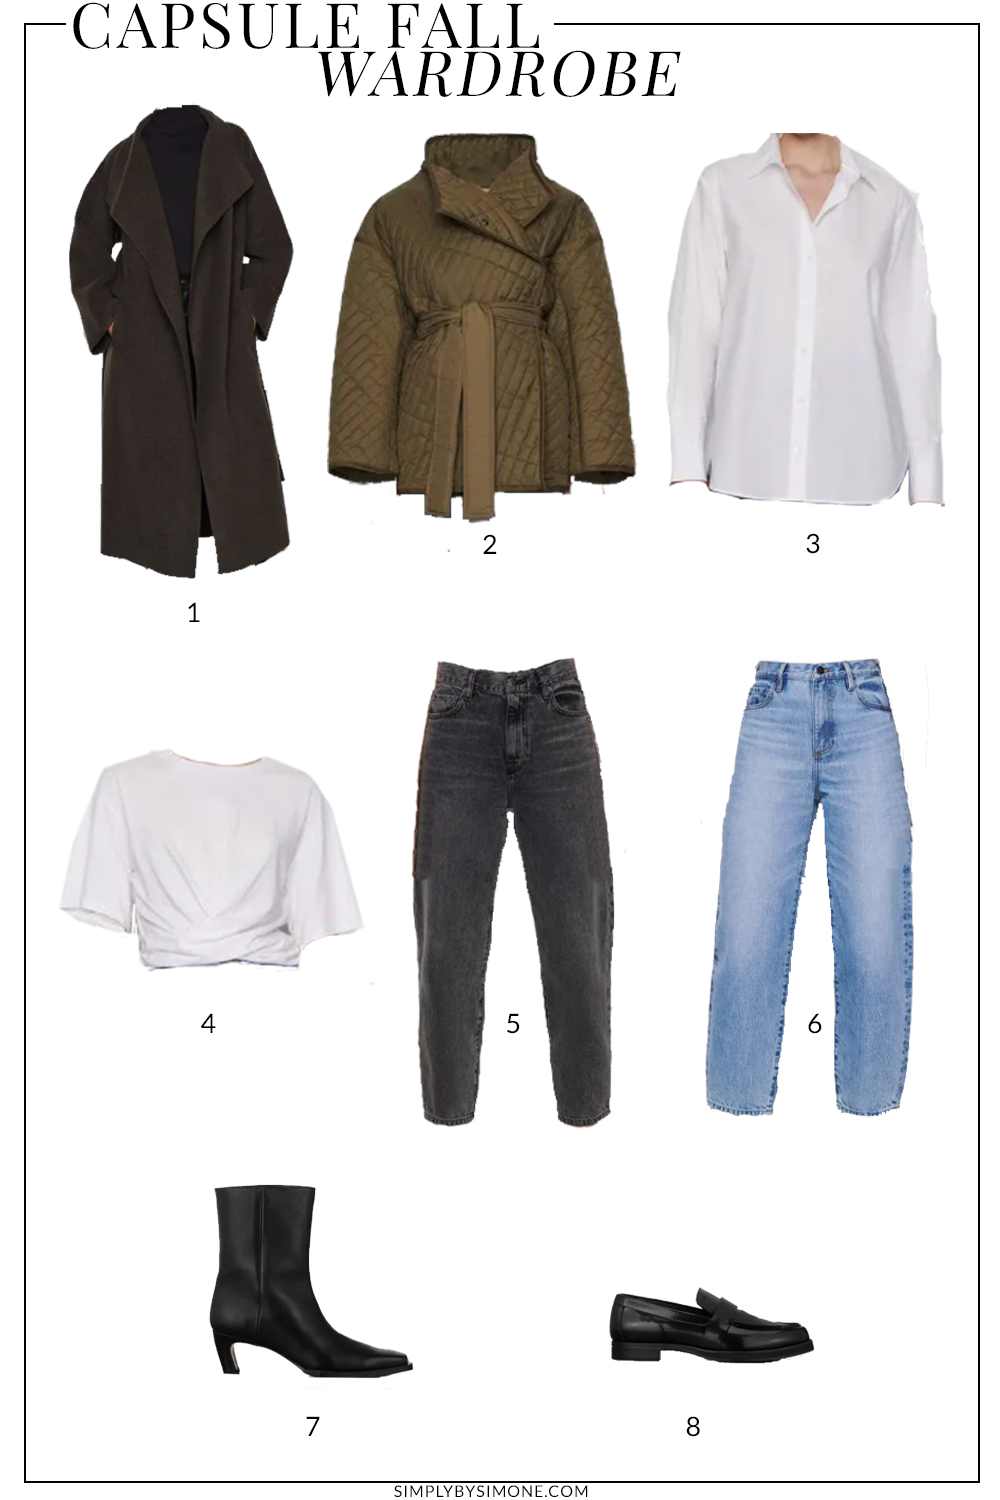 Frame Clothing Fall Capsule Wardrobe Items | 8 Pieces, 24 Outfits | How to Build a Capsule Wardrobe | Frame Clothing Fall Clothes | Outfit Inspiration | 24 Fall Weather Outfit Ideas | Fall Vacation Packing Guide | Frame Clothing Fall Capsule Wardrobe - What To Wear this Fall 2021 - Simply by Simone